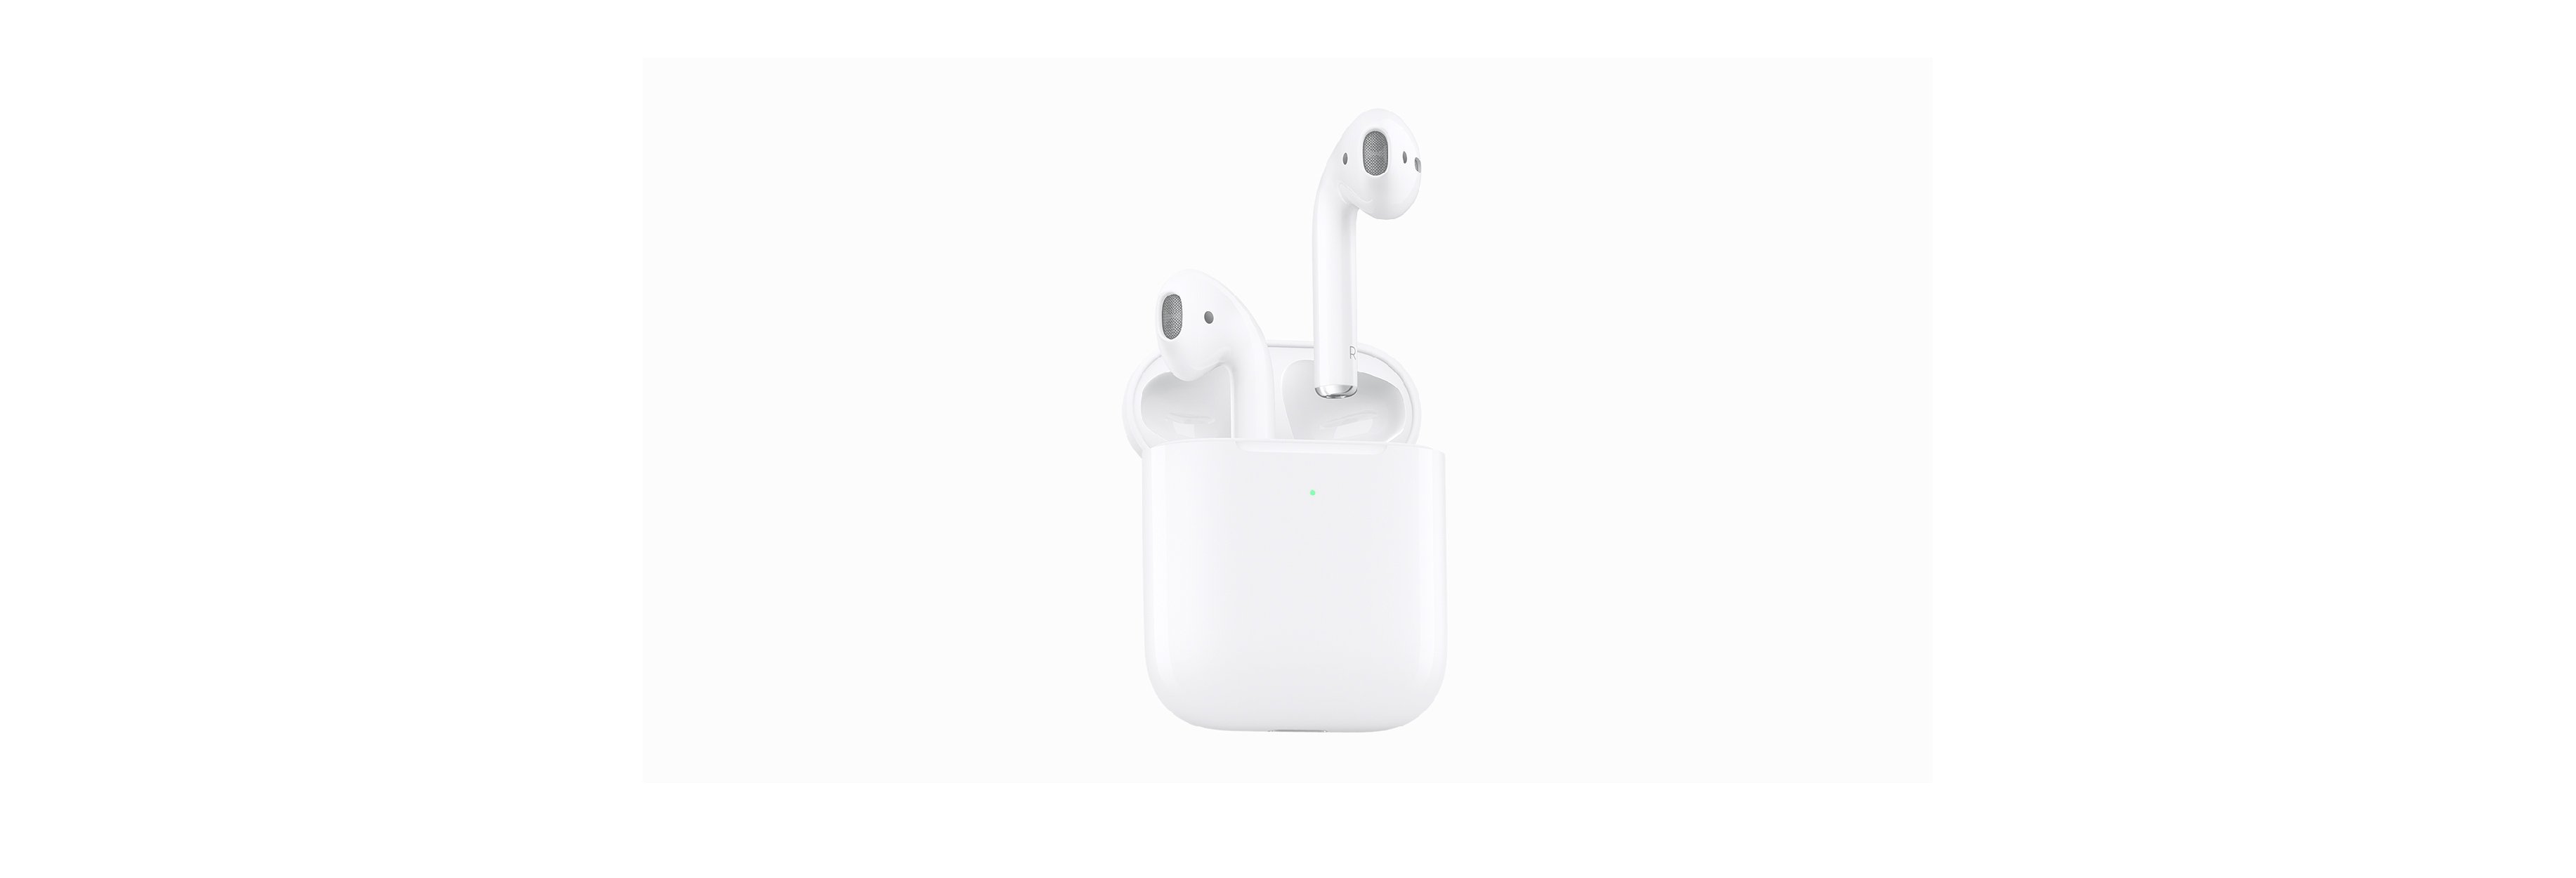 4 Reasons to buy an Airpod 2 vs. the "HODL" The Apple Official "Air Power" Website Leak